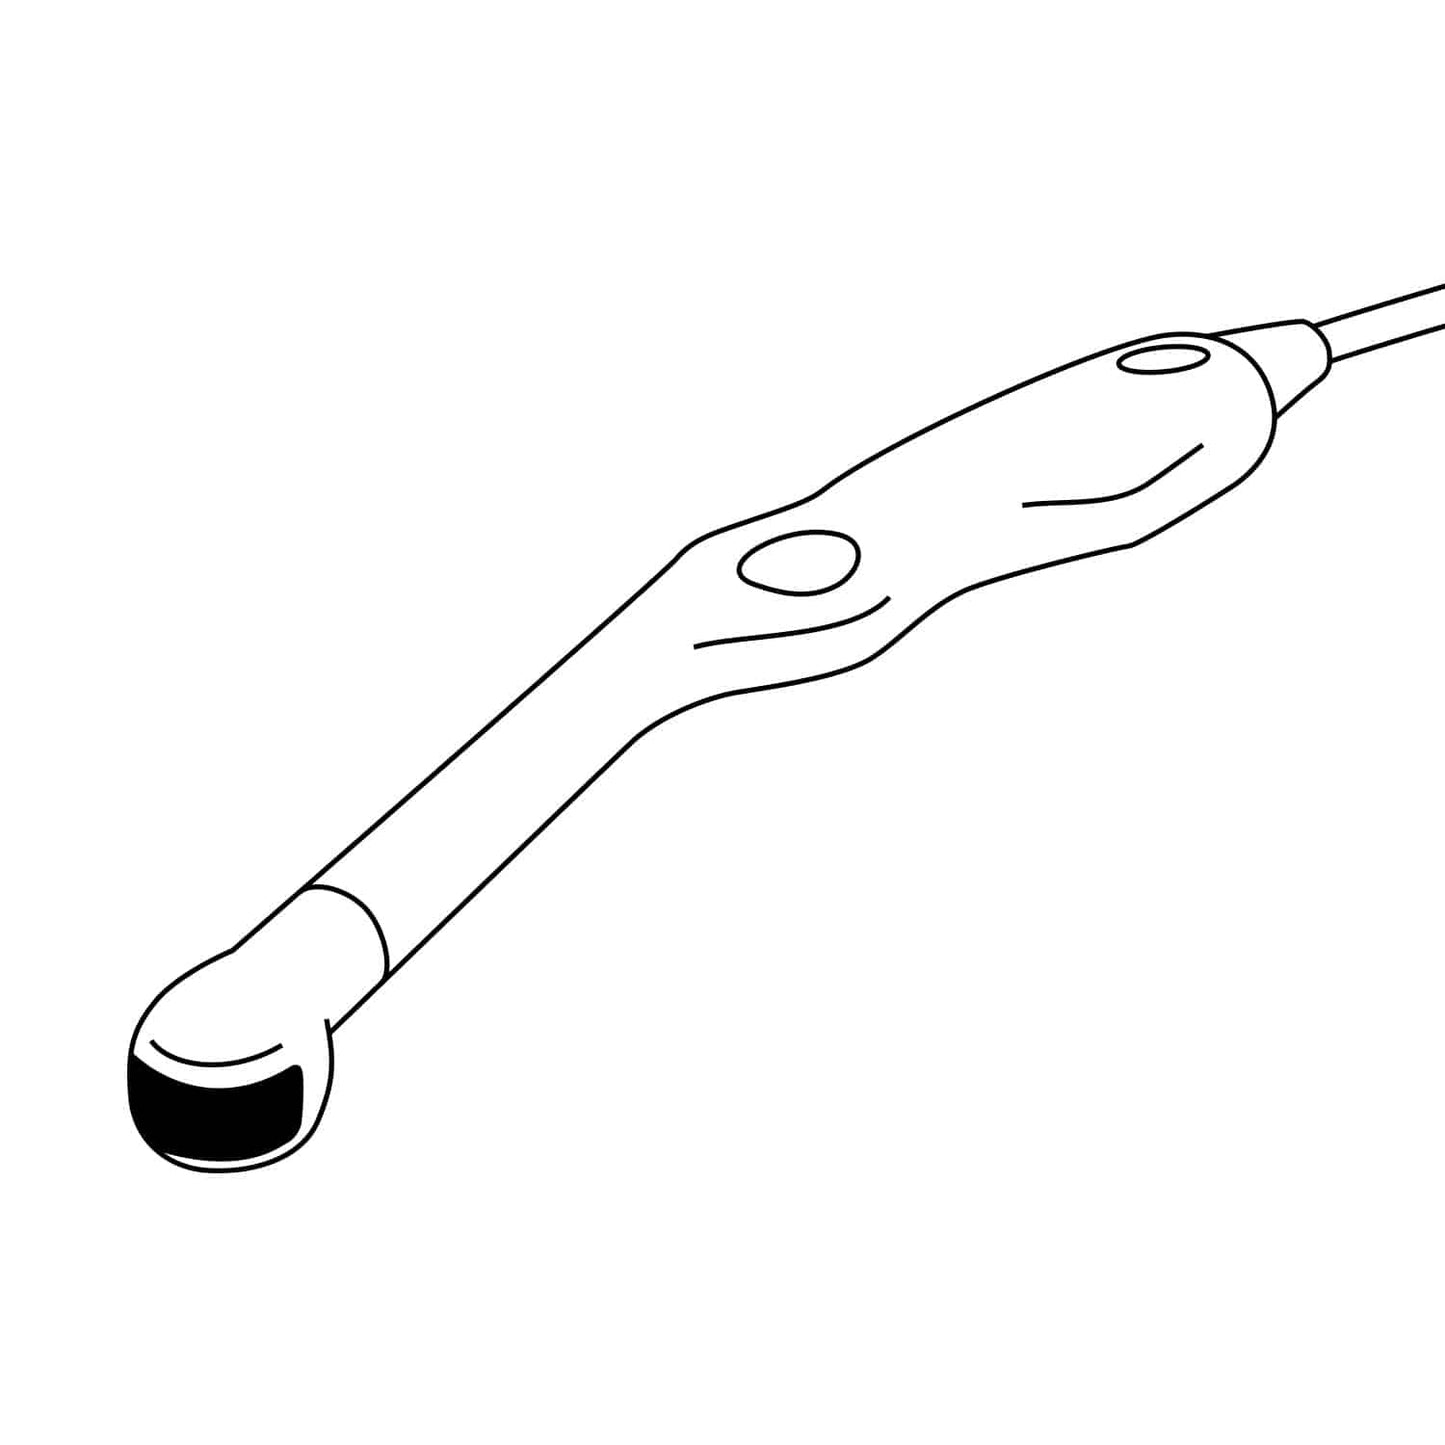 Trans-Vaginal Transducer V6-A For Use With The Chison Eco Ultrasound Machines